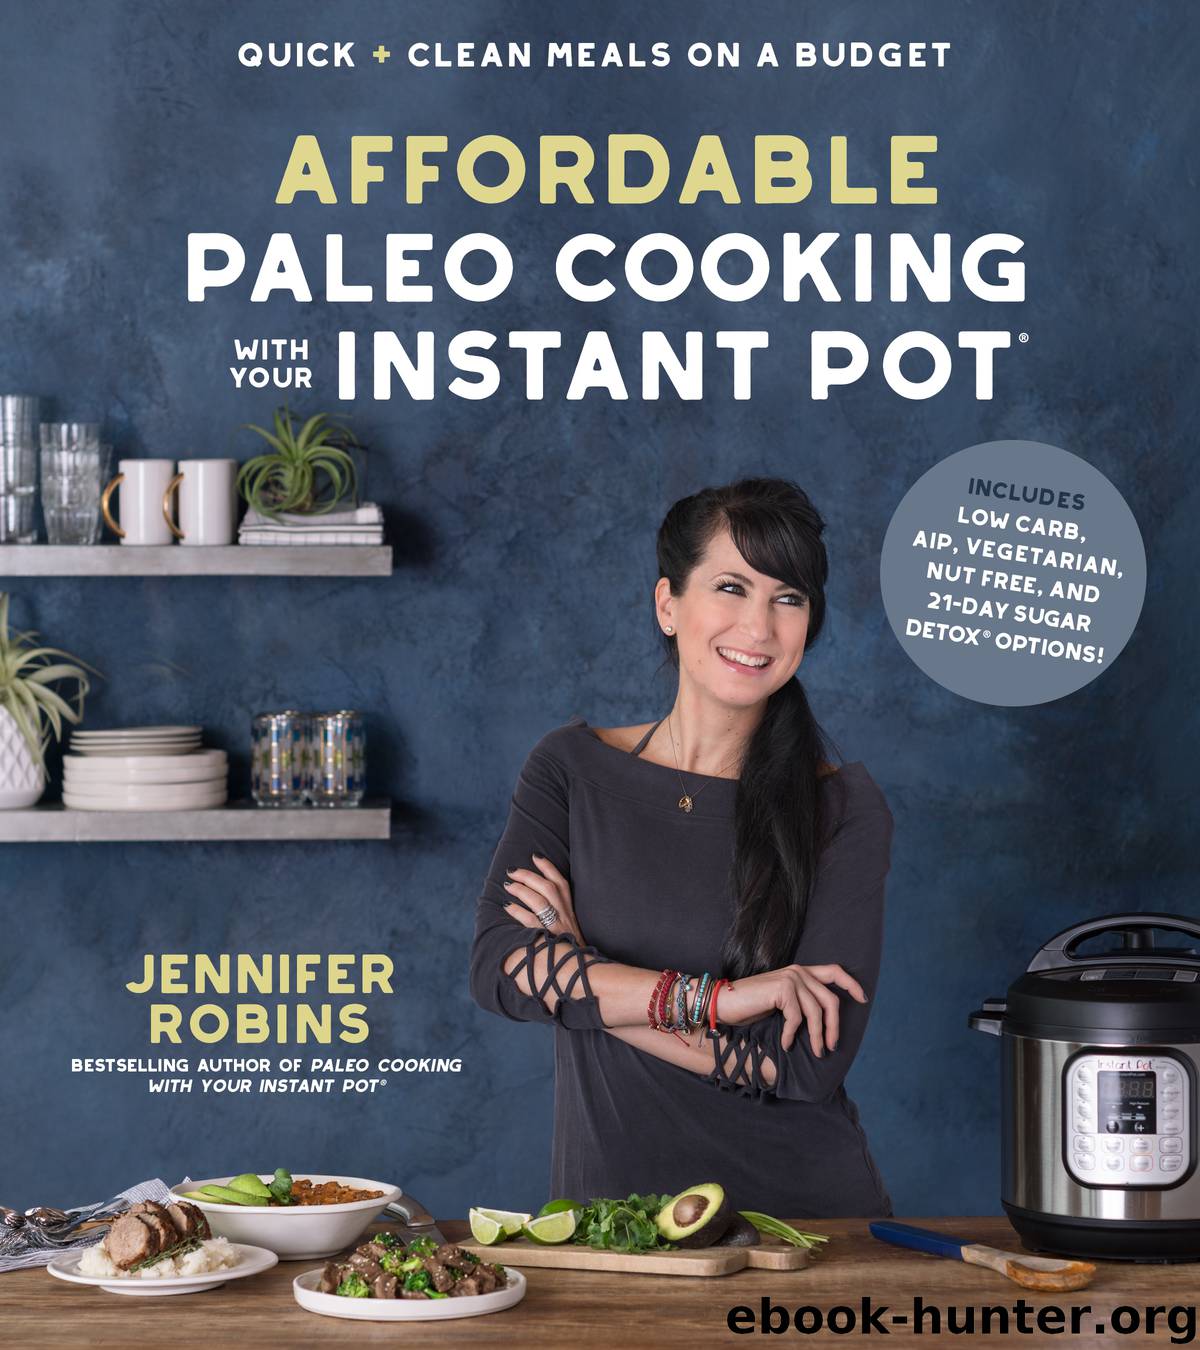 Affordable Paleo Cooking with Your Instant Pot by Jennifer Robins